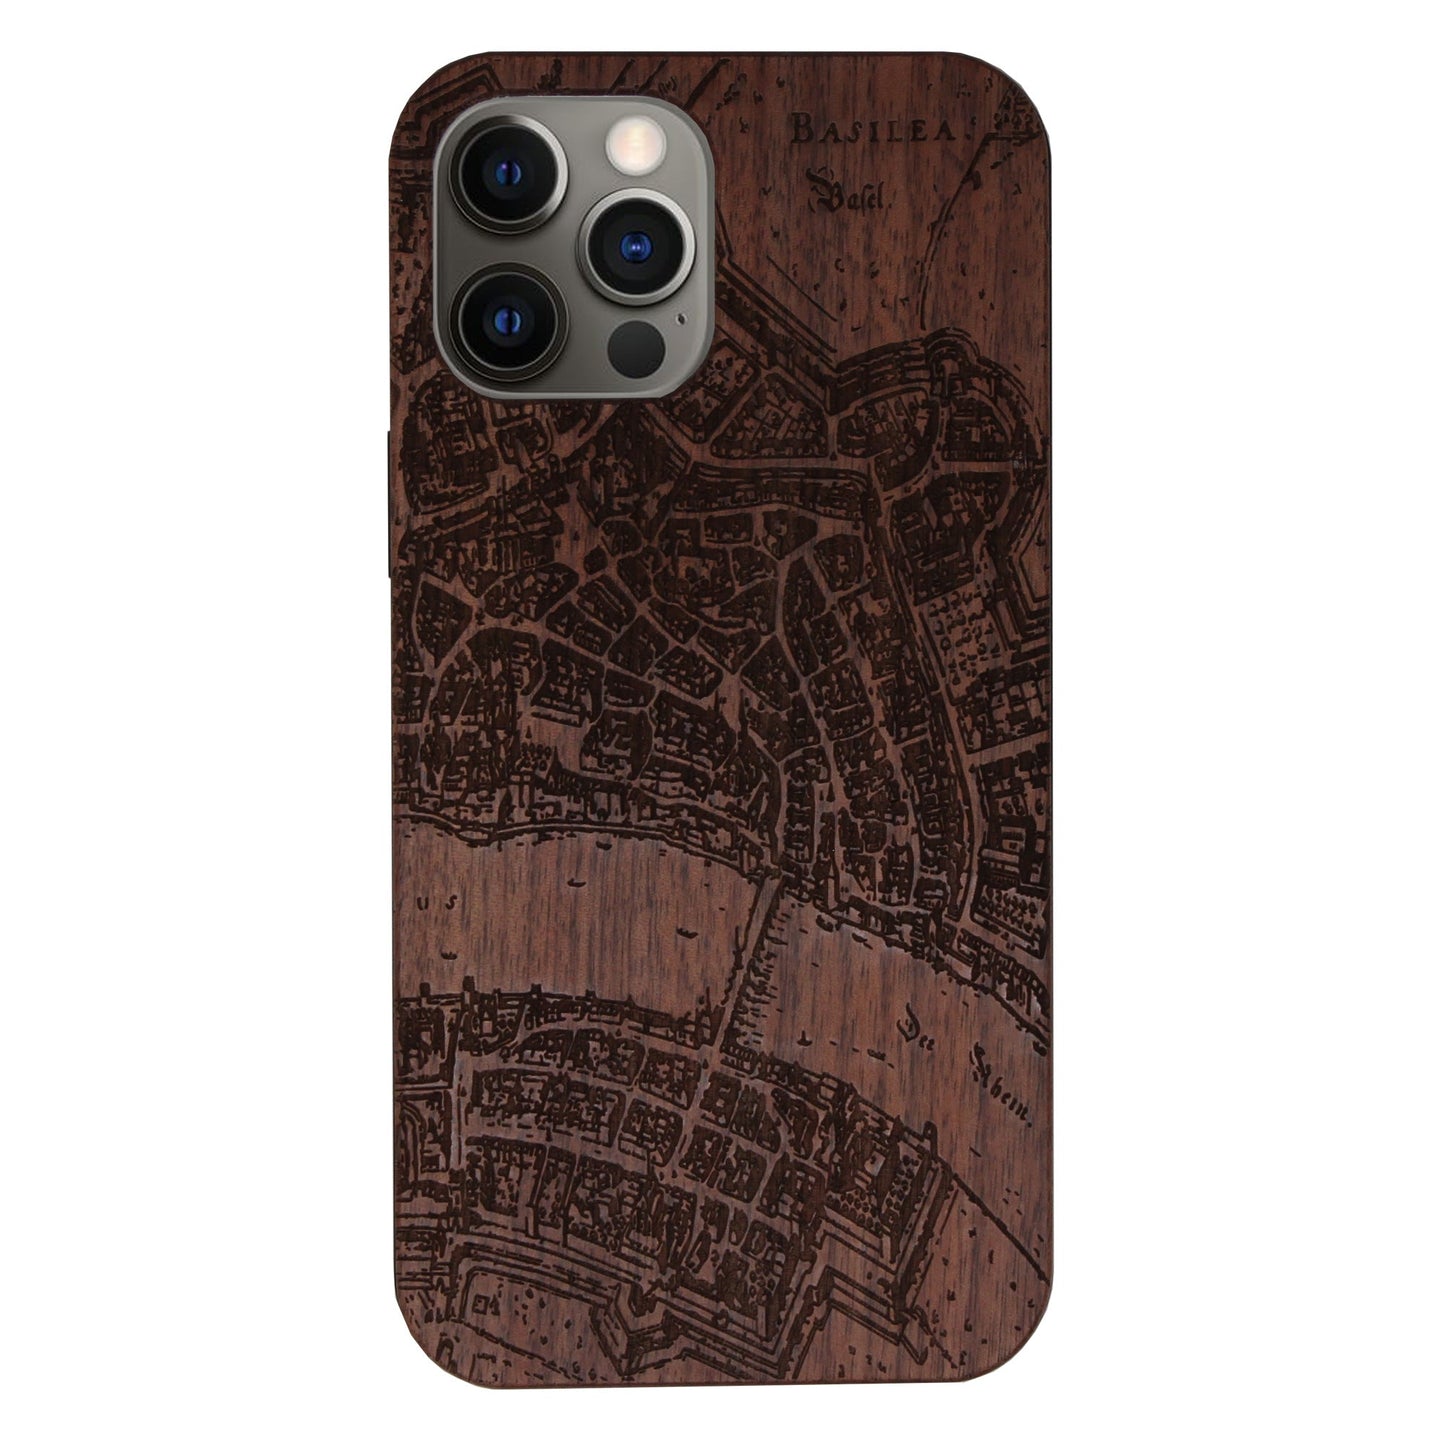 Basel Merian Eden case made of walnut wood for iPhone 12/12 Pro